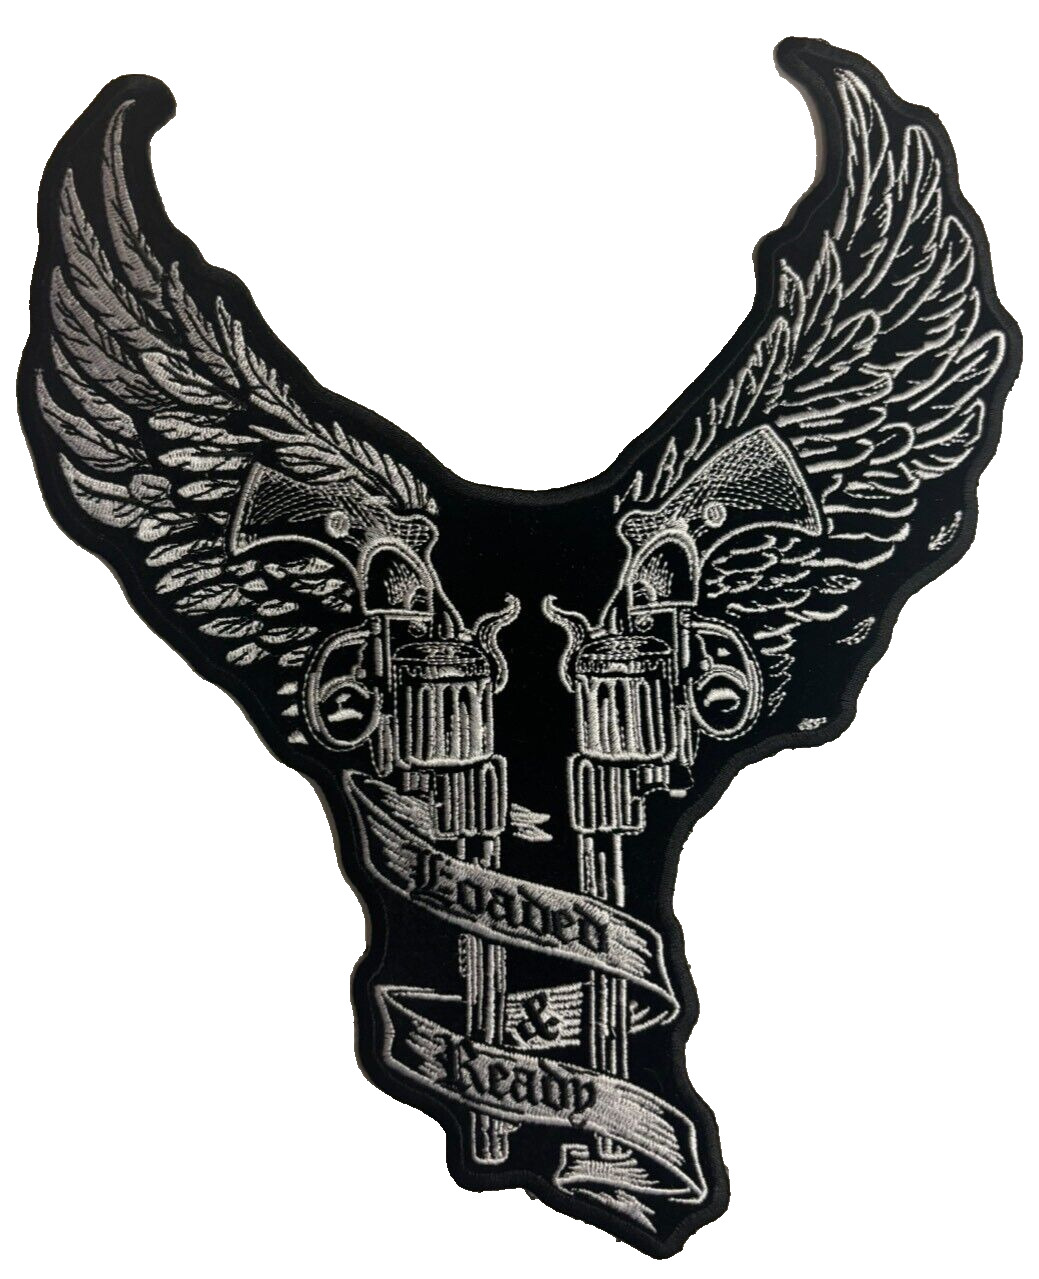 LOADED AND READY 2 PISTOLS WITH WINGS LARGE BACK PATCH IRON ON 10 INCH